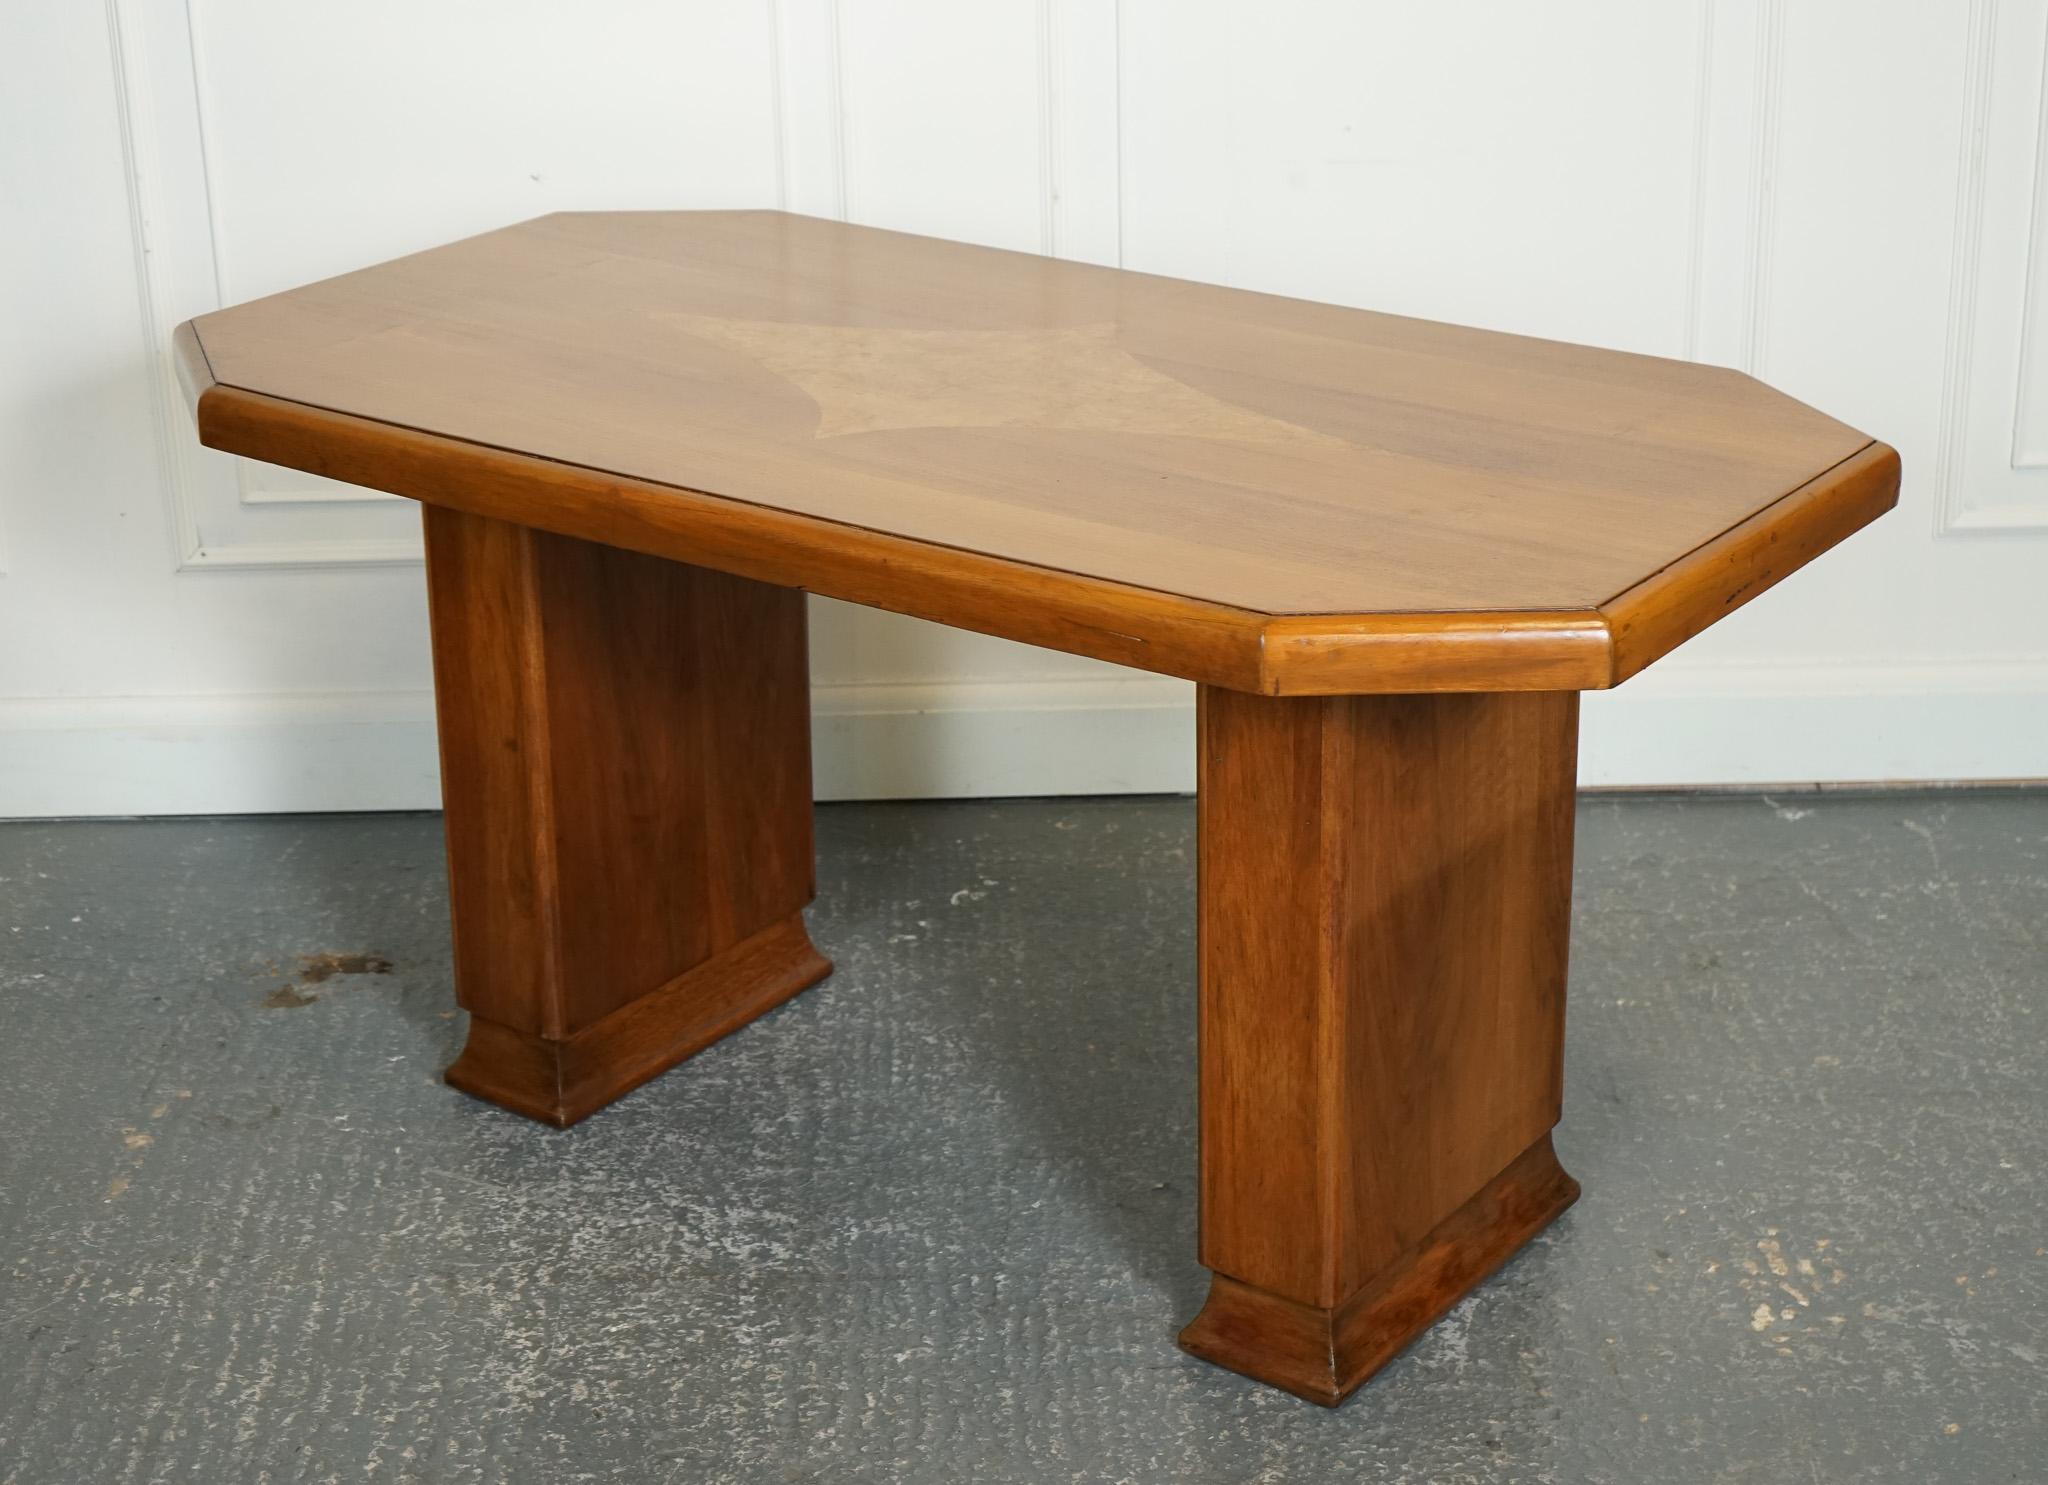 Art Deco VINTAGE ART DECO WALNUT DINiNG TABLE 4 TO 6 PERSON J1 For Sale